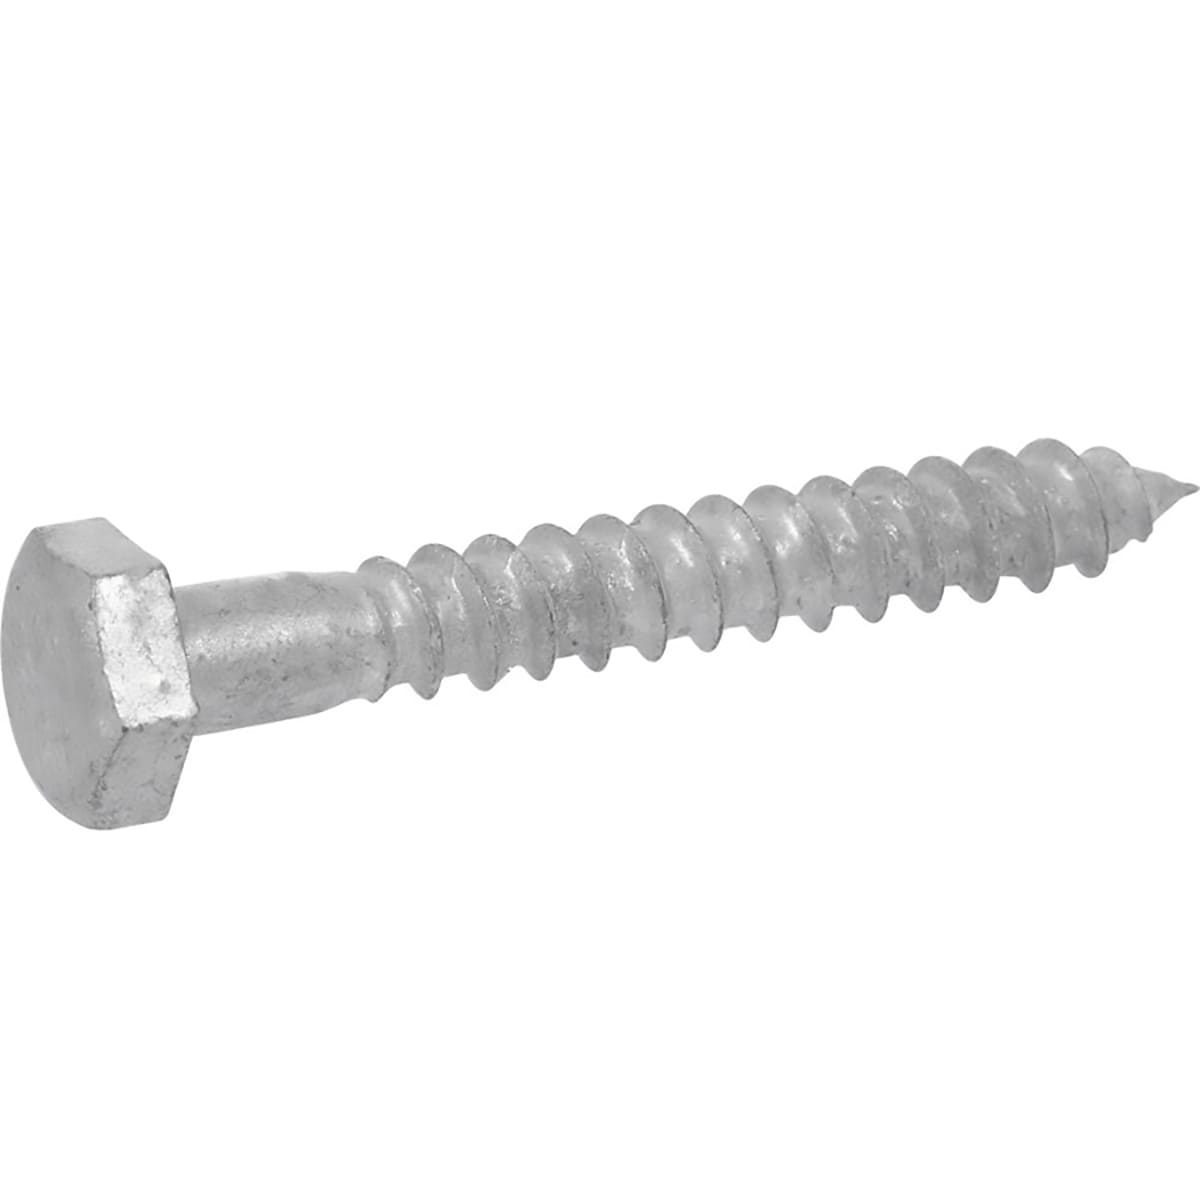 Pilot Hole Sizes for Wood Screws – Fair Wind Fasteners